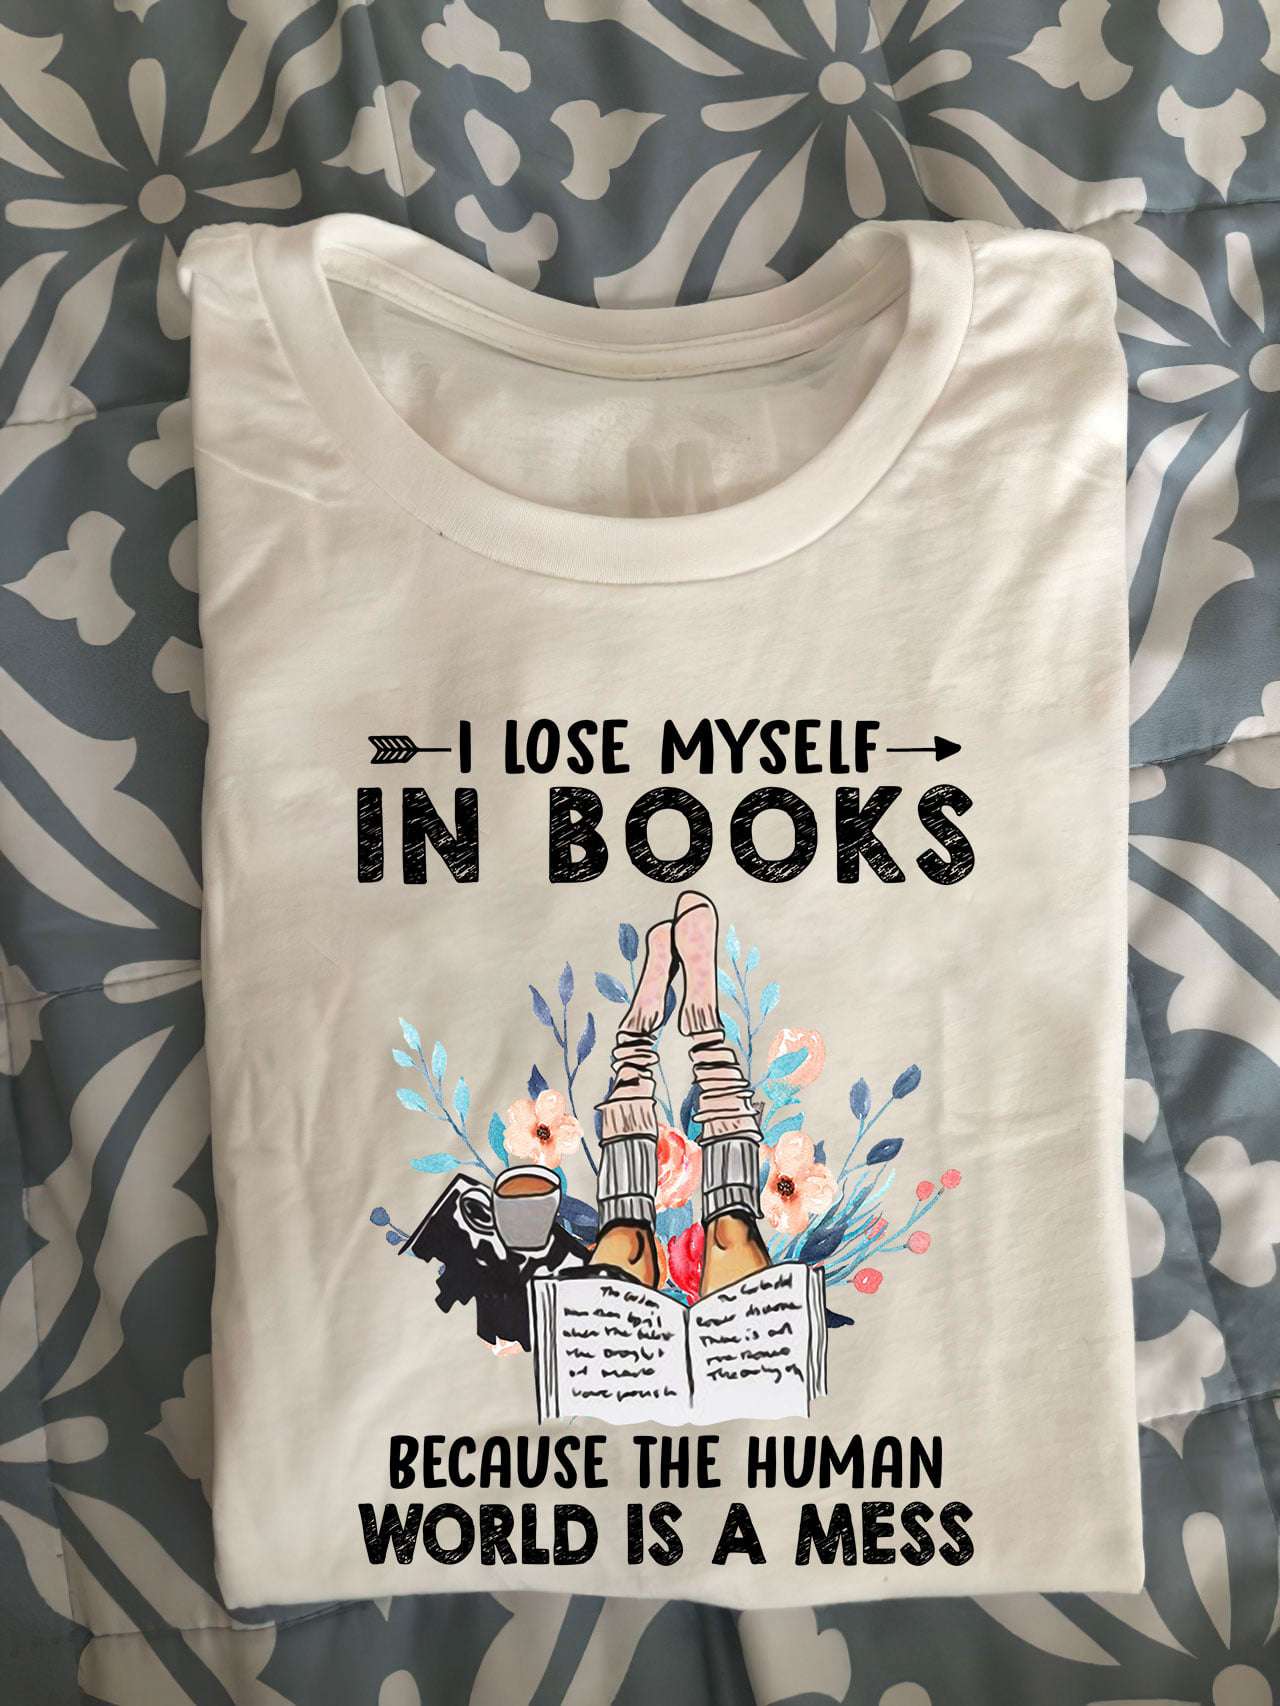 I lose myself in books beause the human world is a mess - Reading book drinking coffee, bookaholic's gift